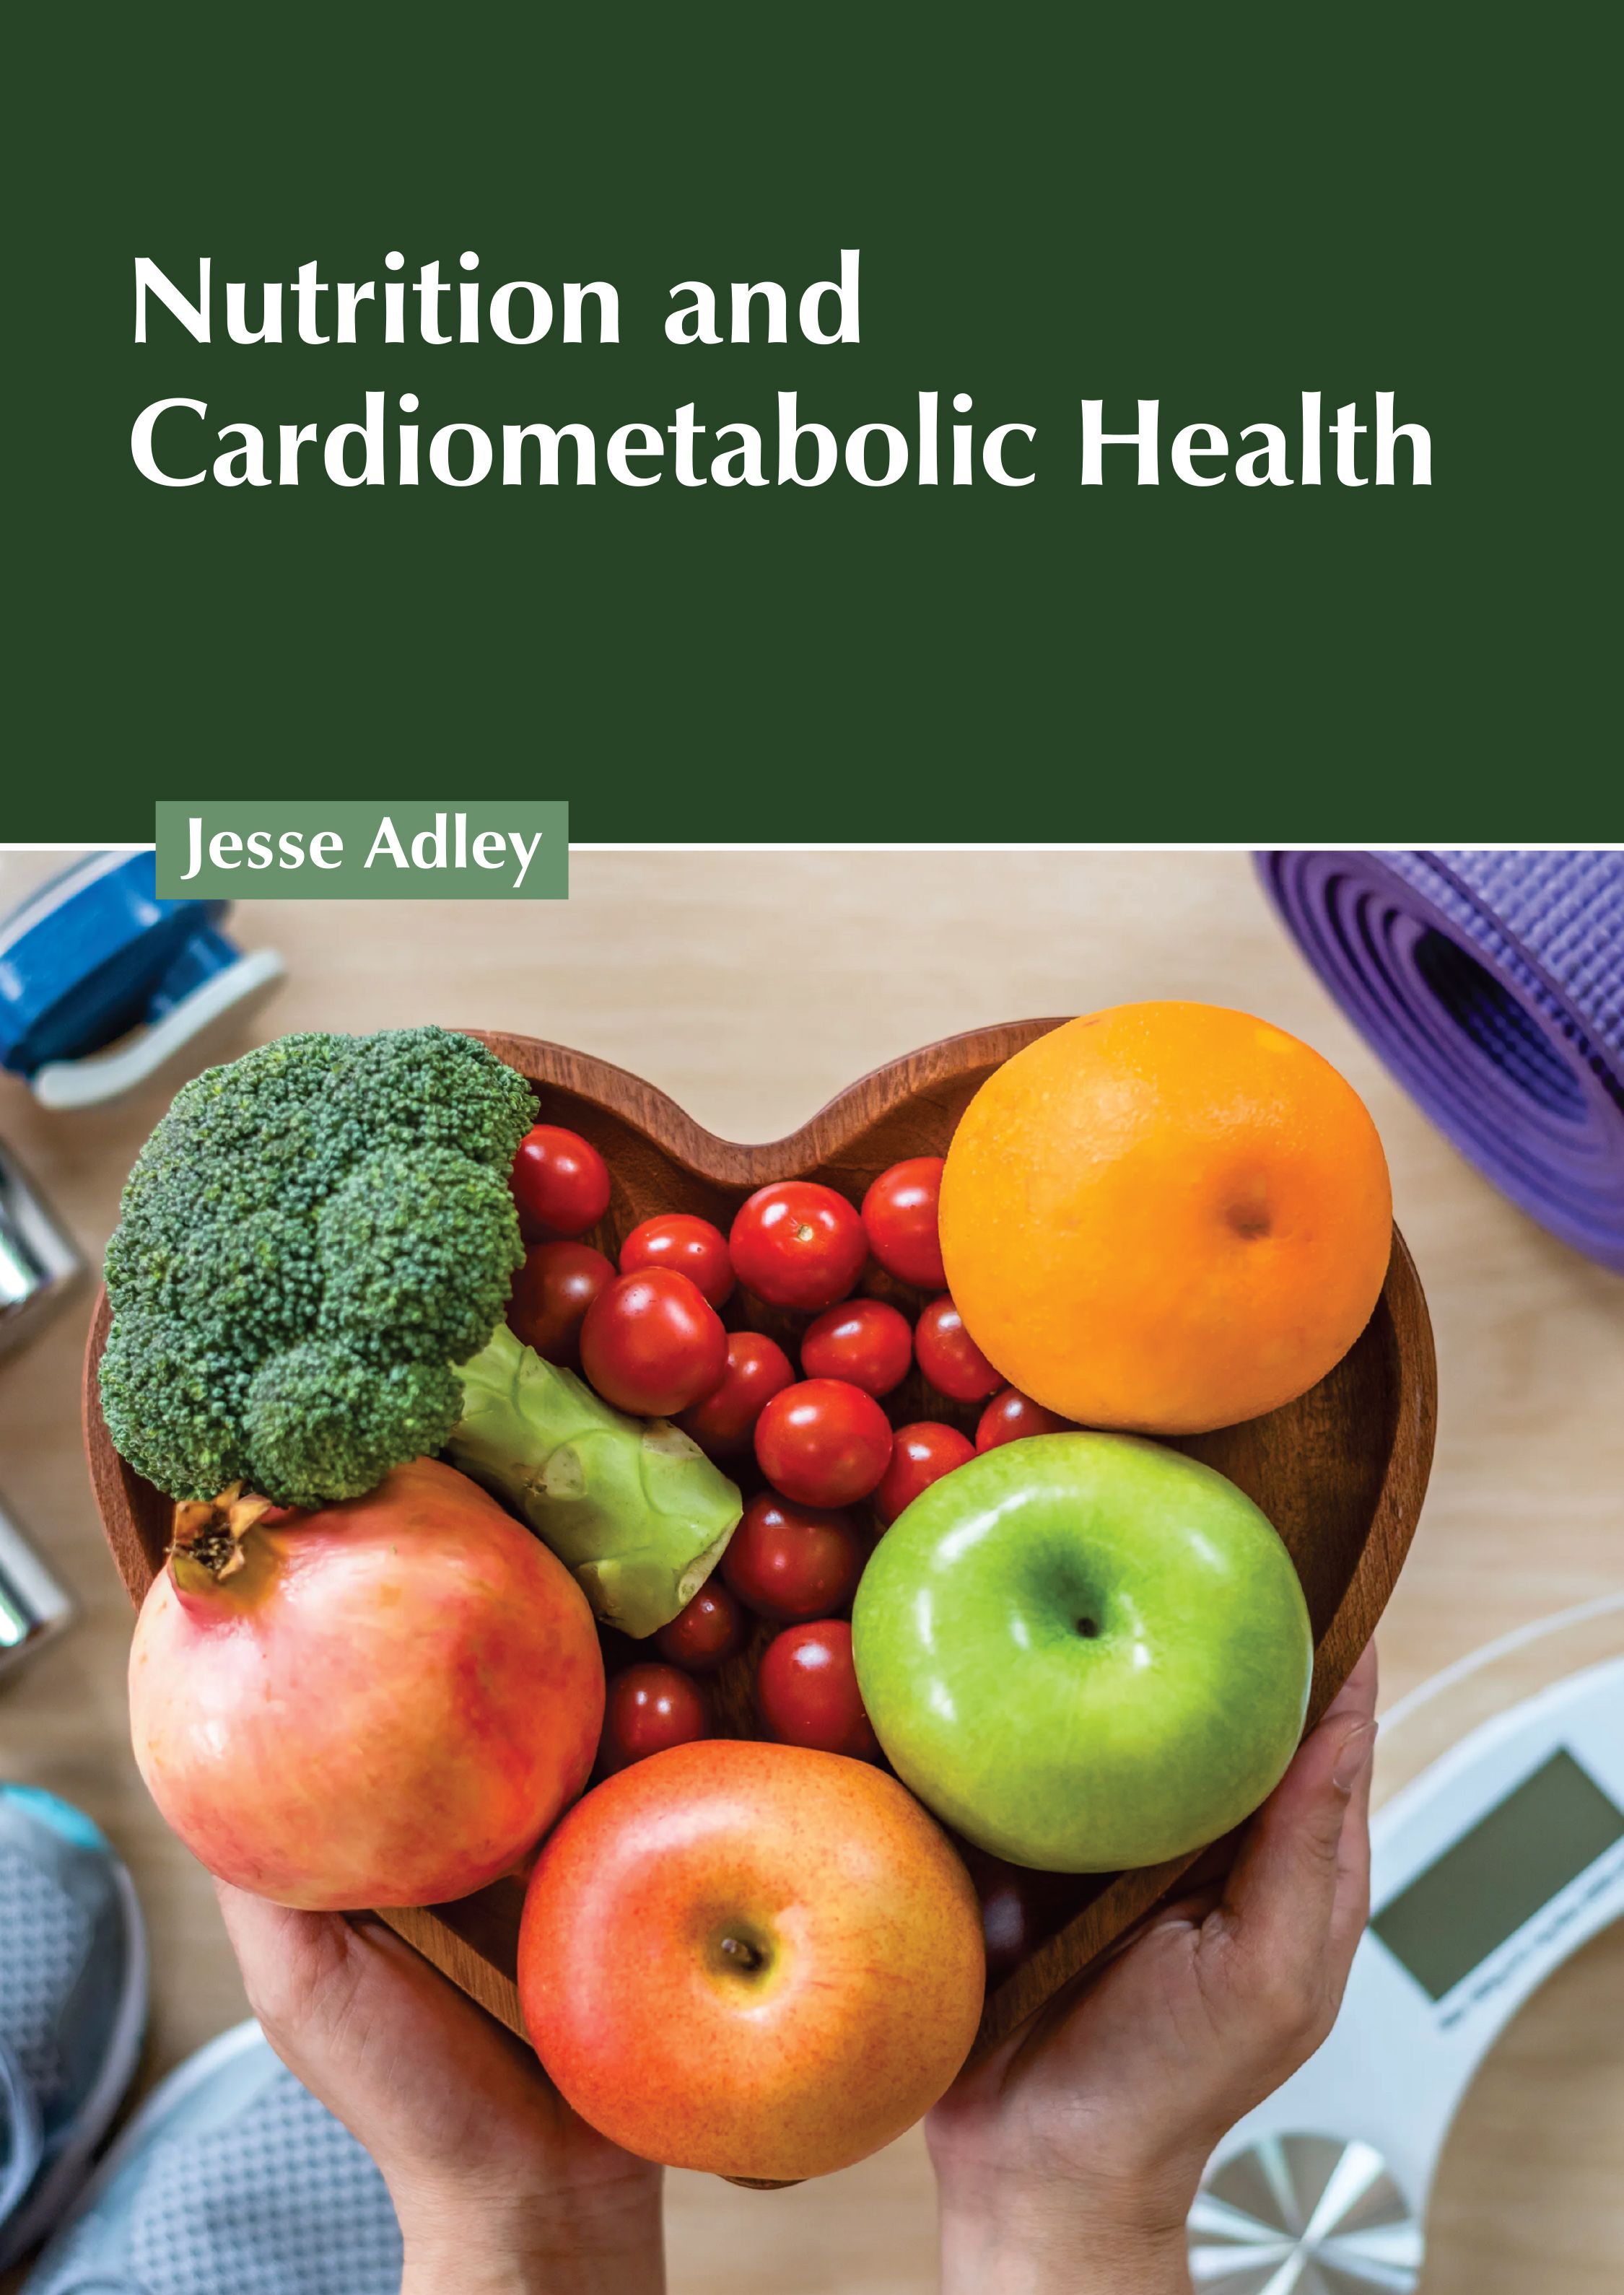 exclusive-publishers/american-medical-publishers/nutrition-and-cardiometabolic-health-9781639277582